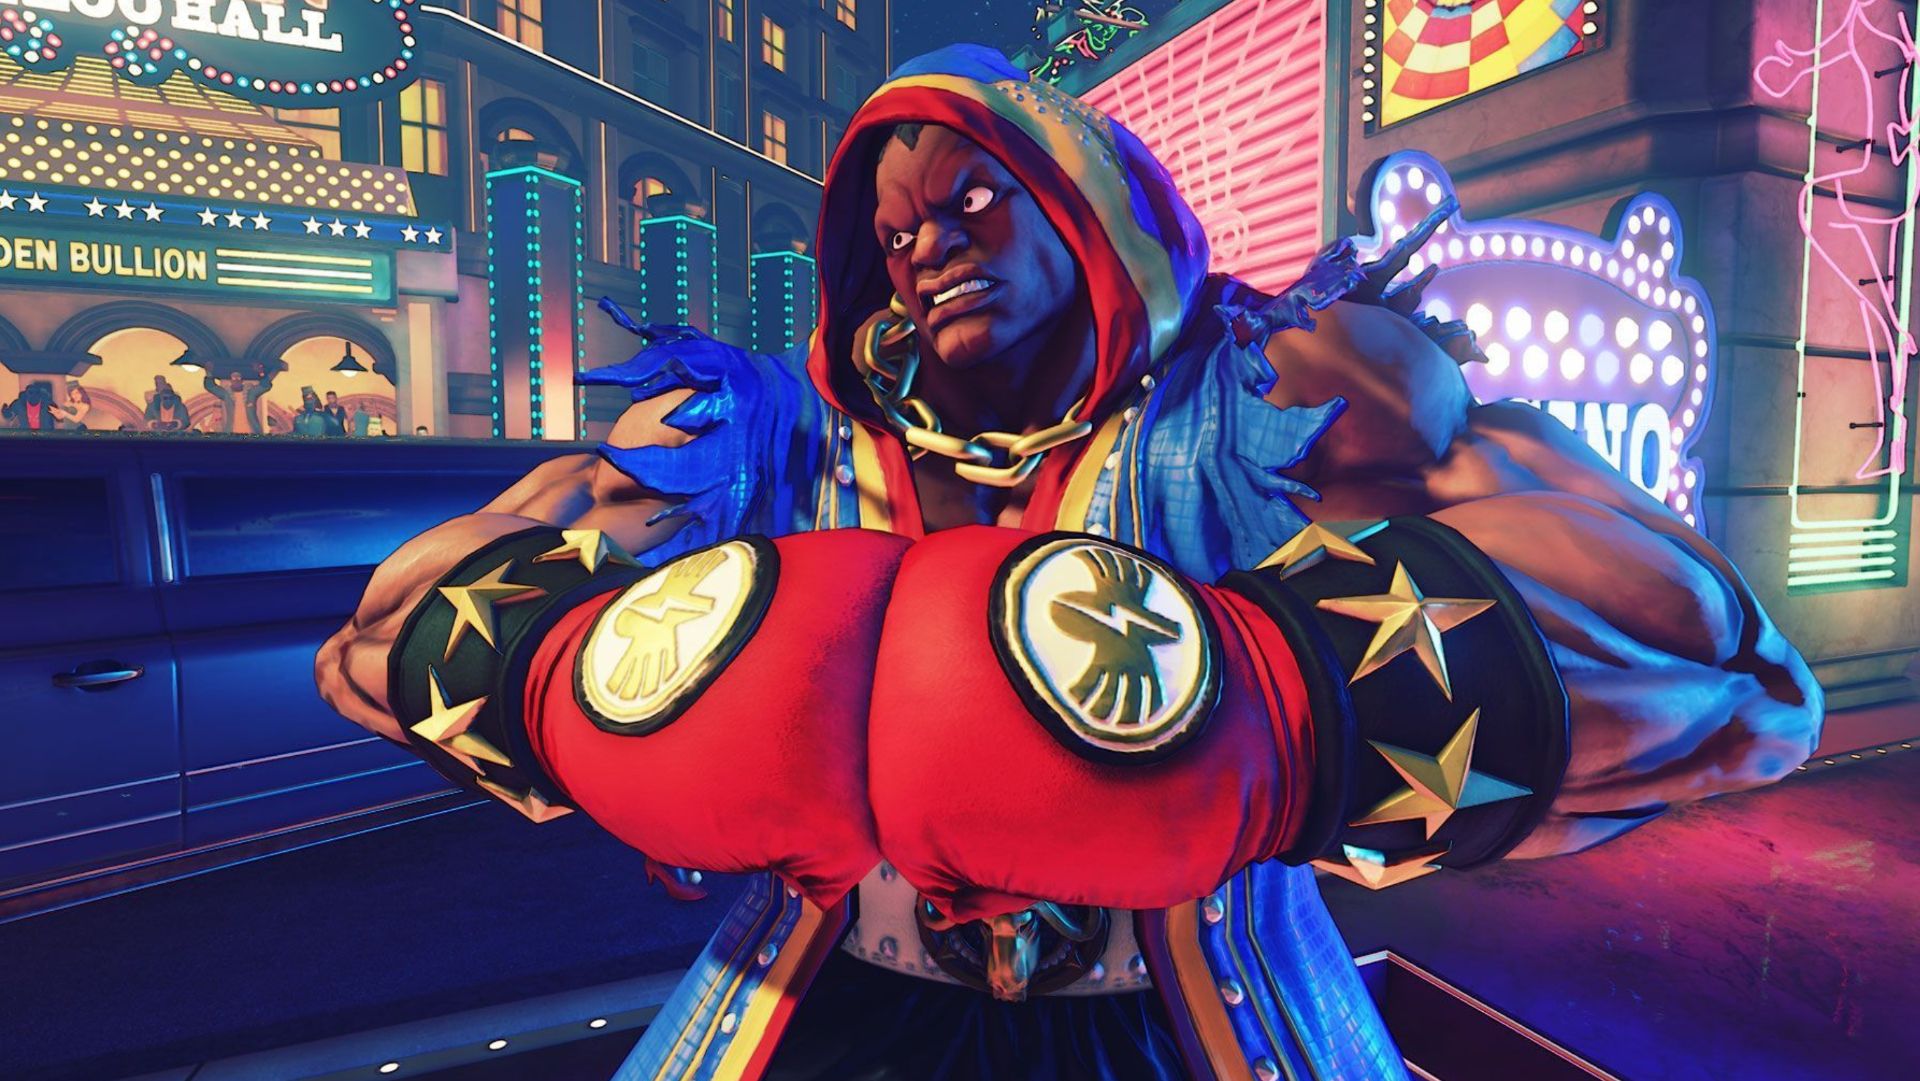 Balrog wearing his boxing garb in Street Fighter V.